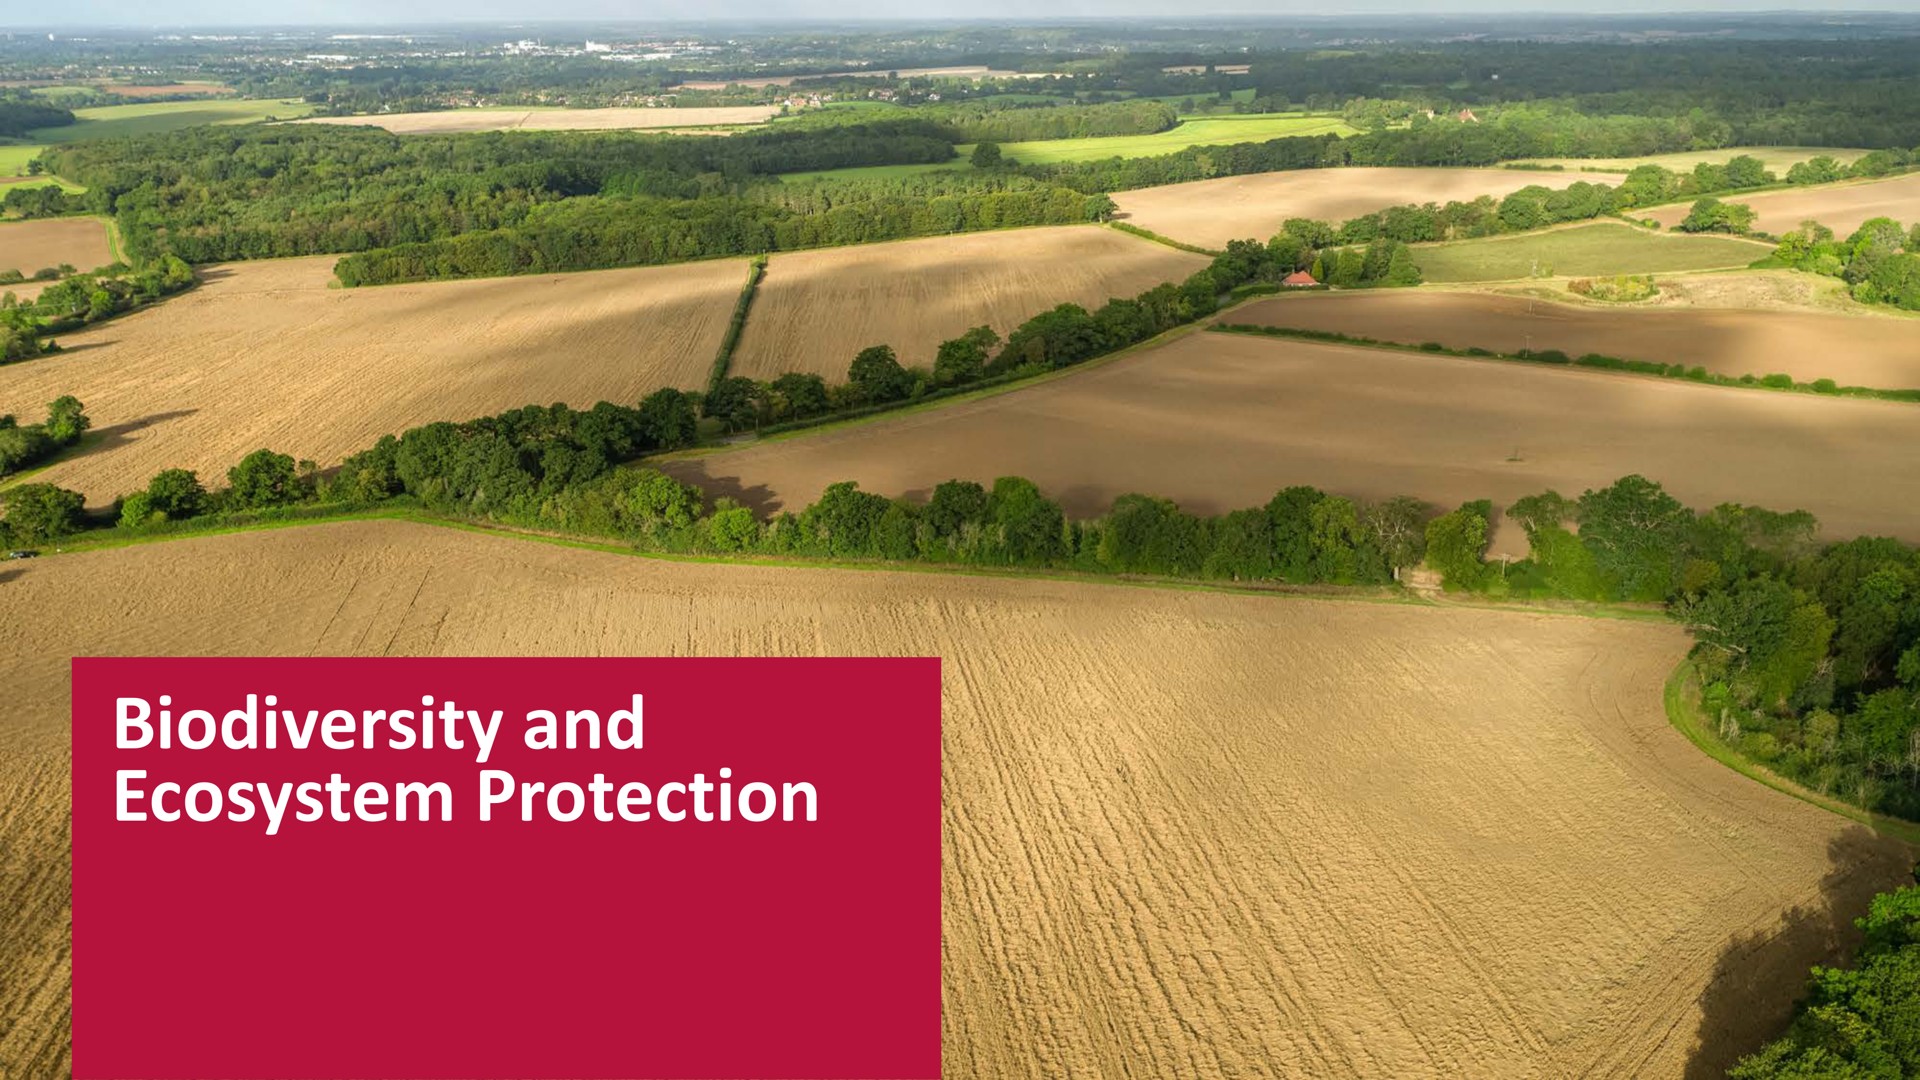 and introduction ecosystem protection | Associated British Foods